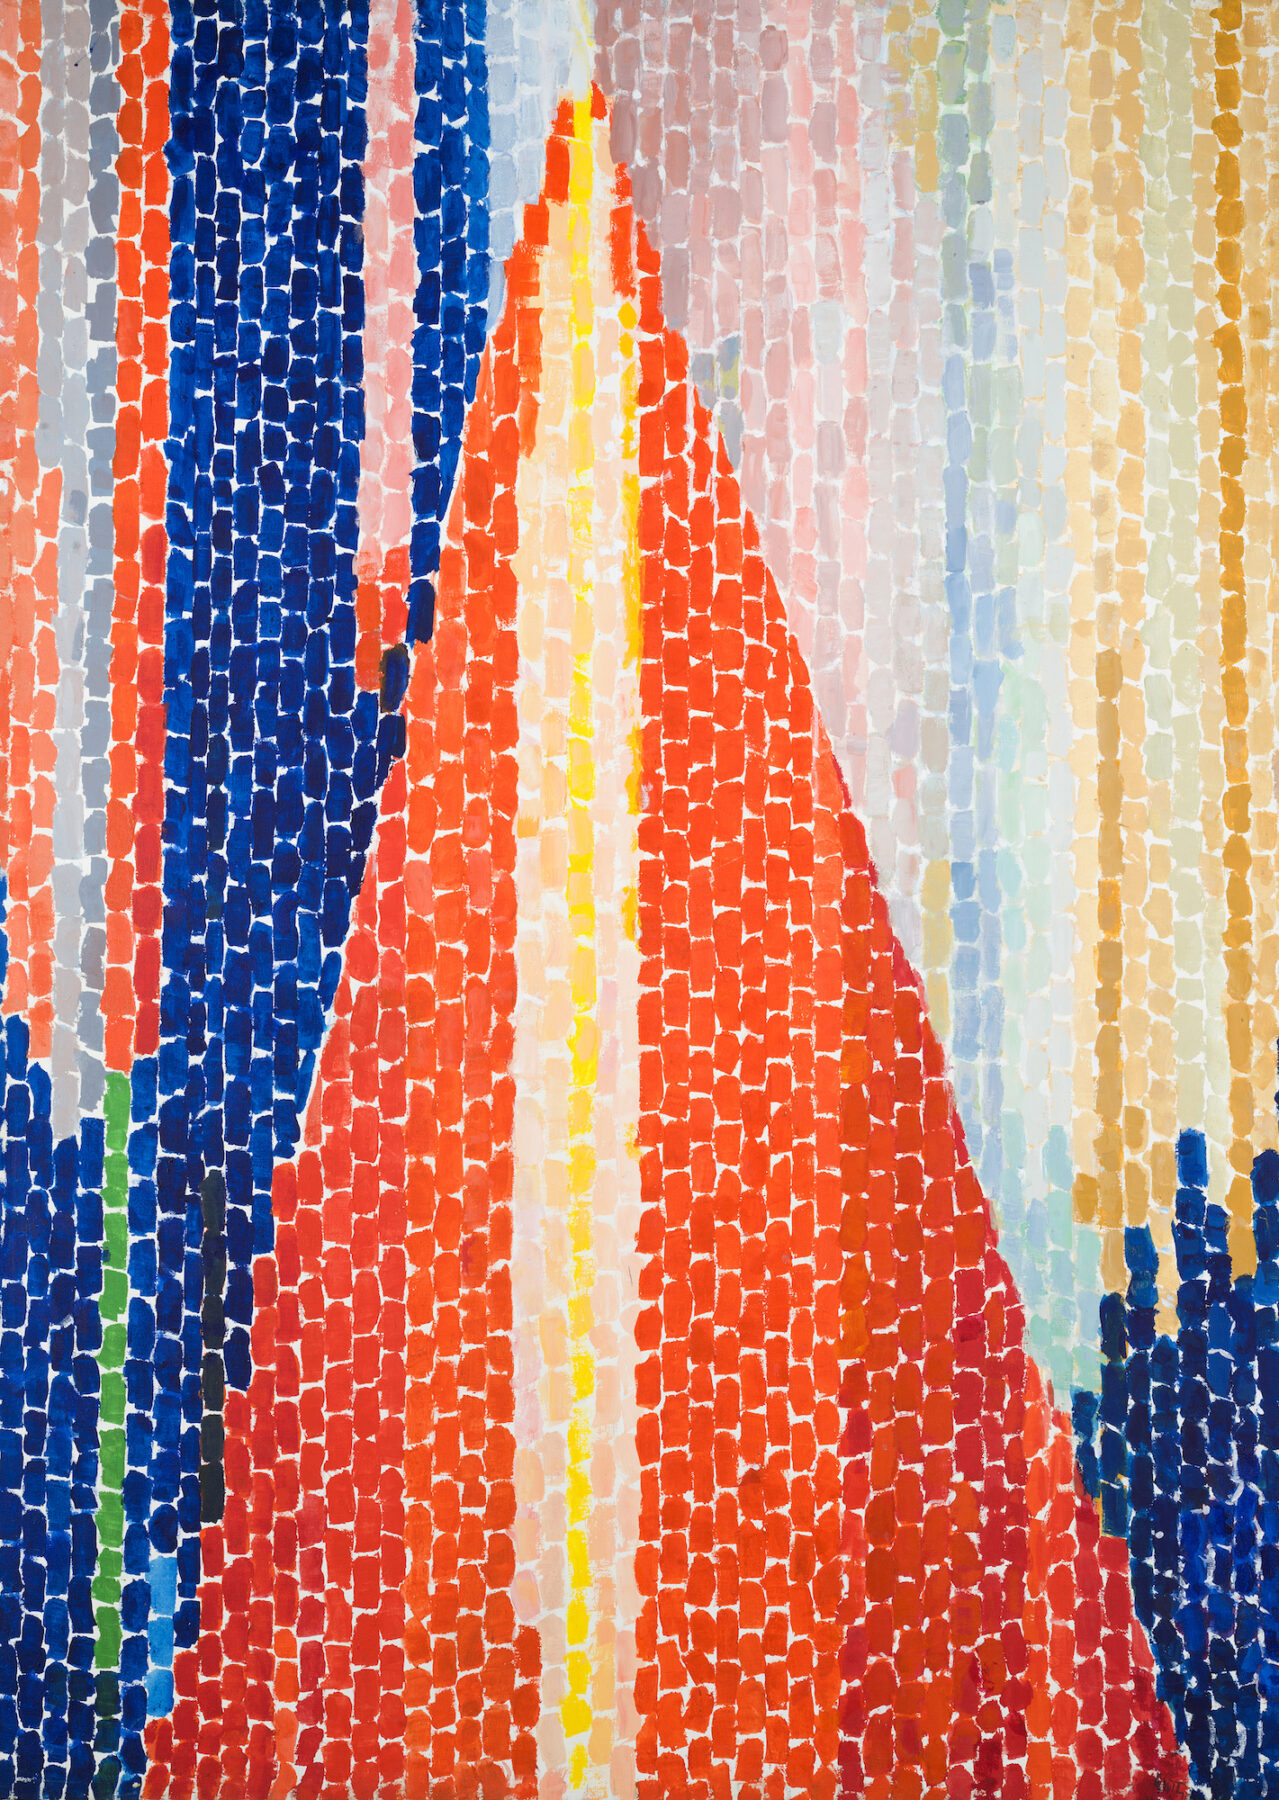 Alma Thomas, Blast Off, acrylic on canvas, 72 x 52 inches, gift of Vincent Melzac, Smithsonian National Air and Space Museum.